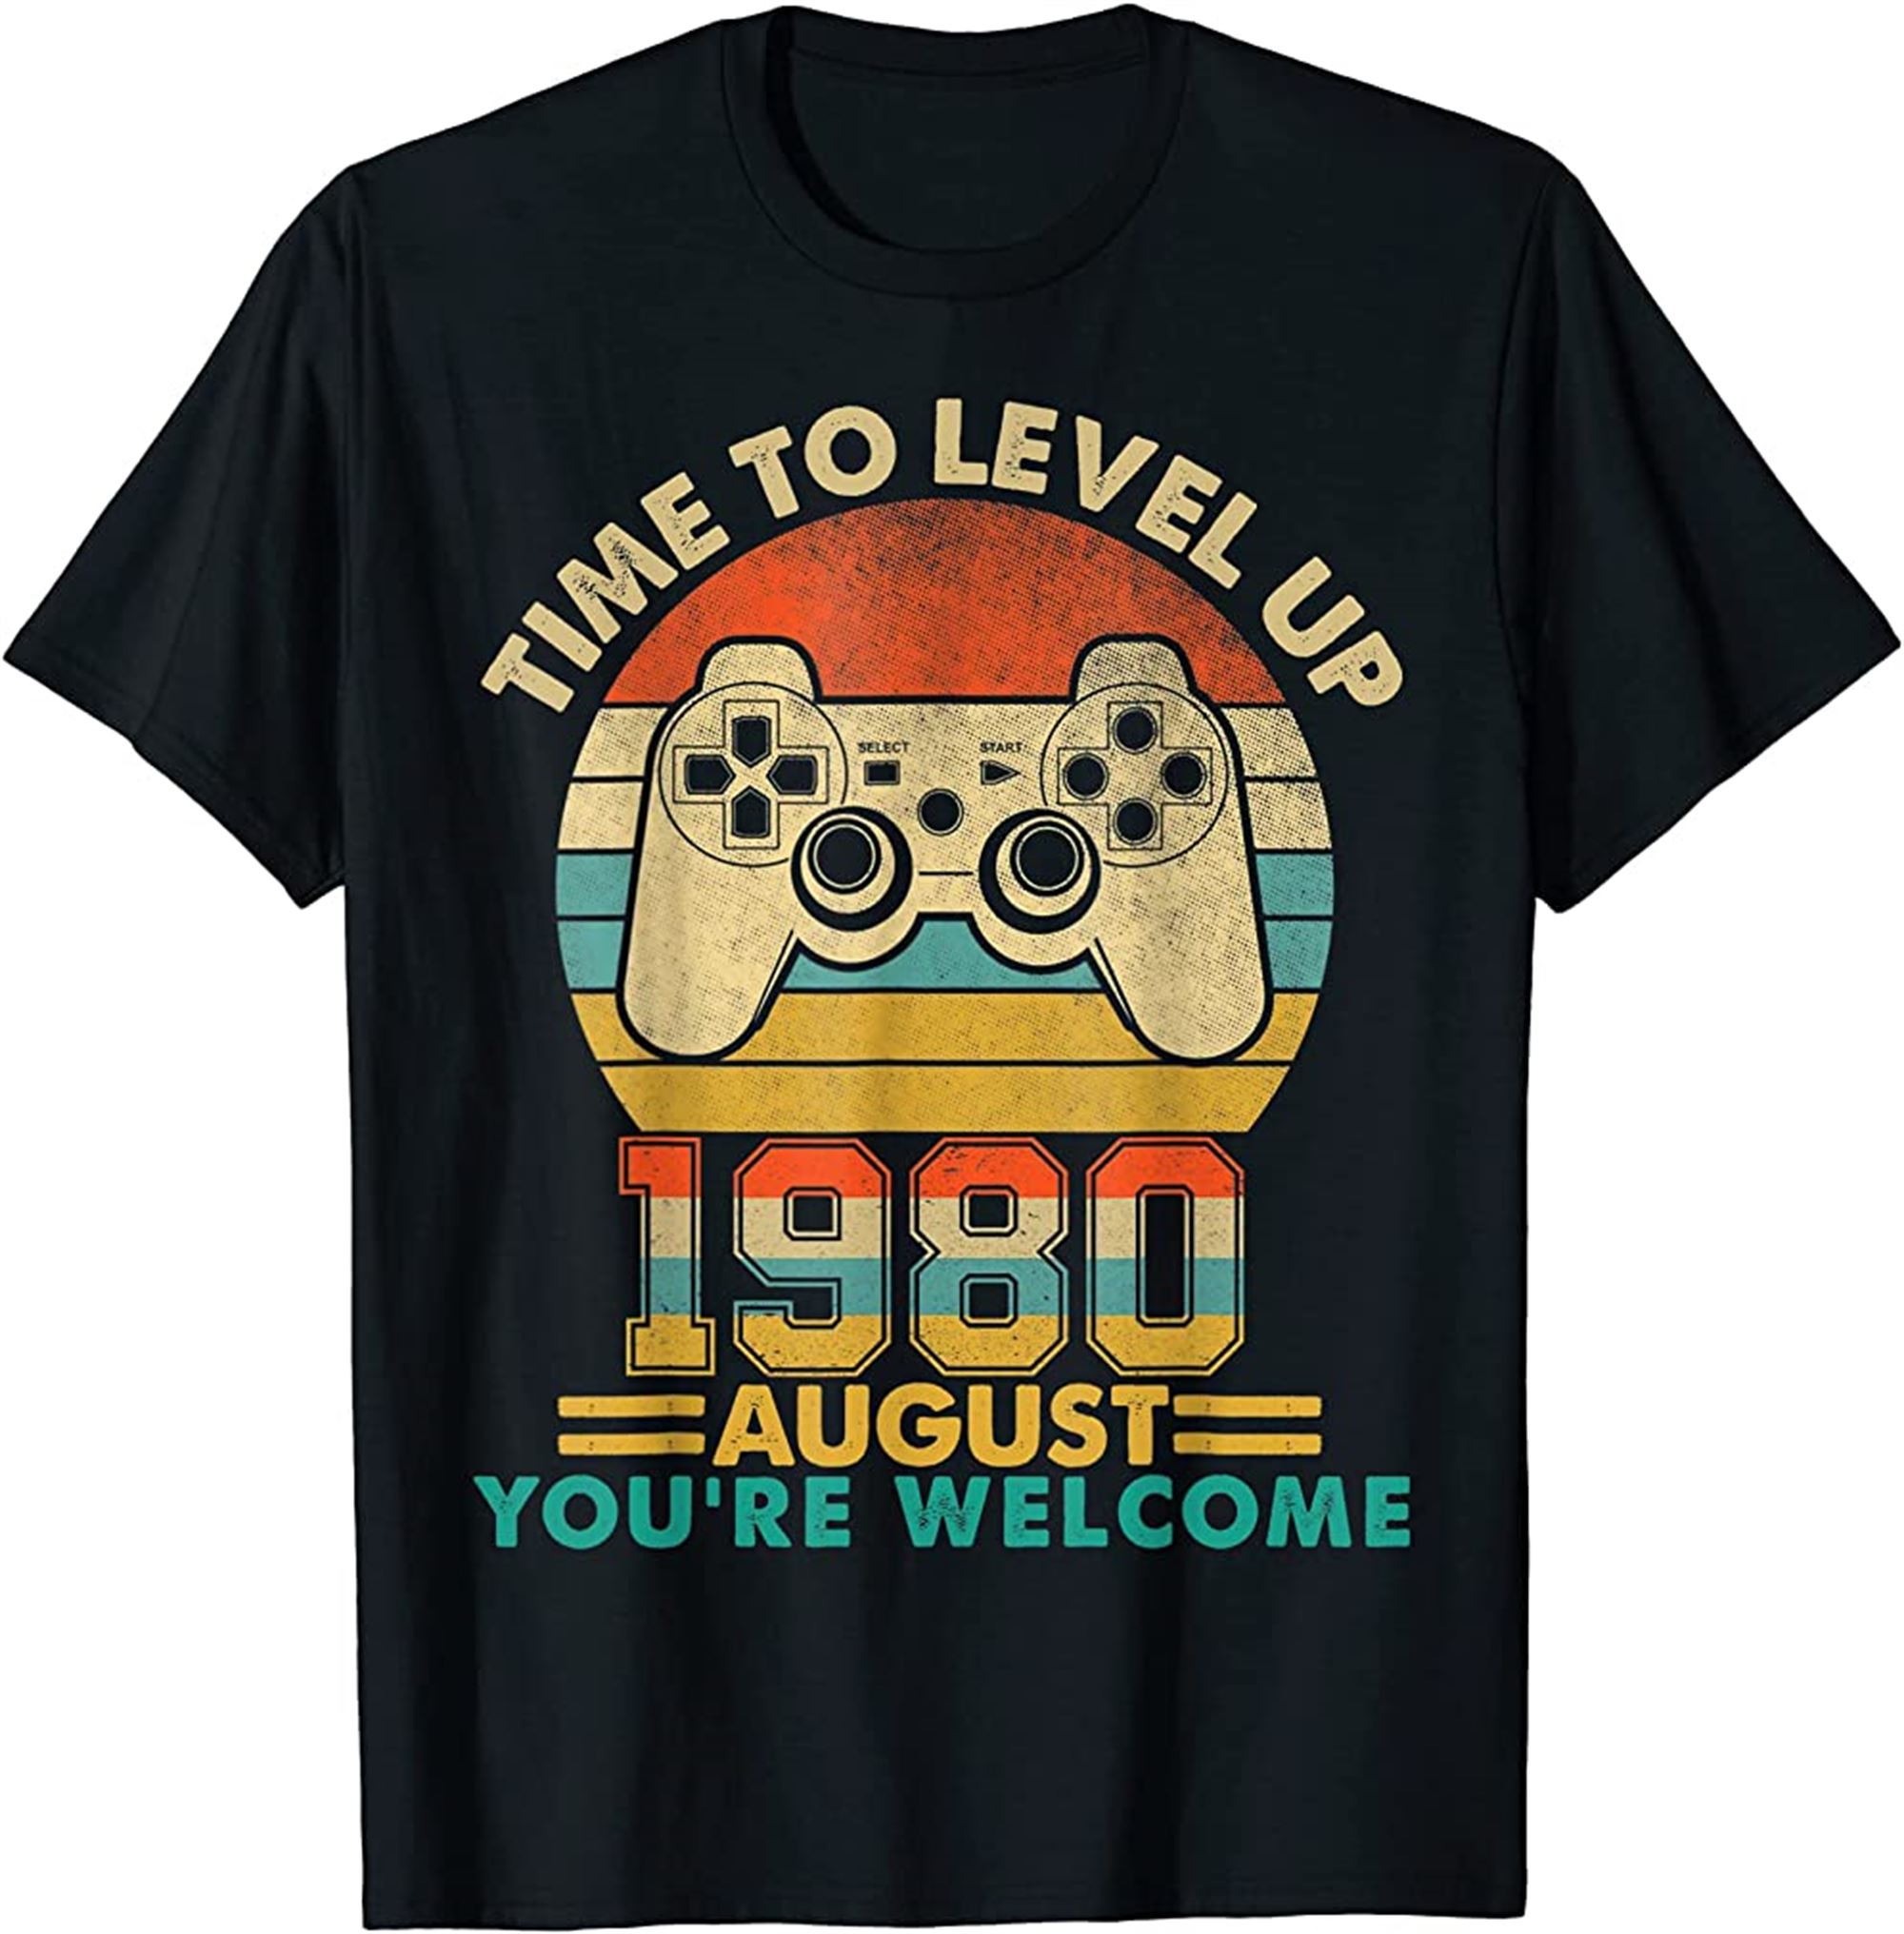 Vintage 1980 August 42 Years Old Video Gamer 42th Birthday T-shirt Size Up To 5xl